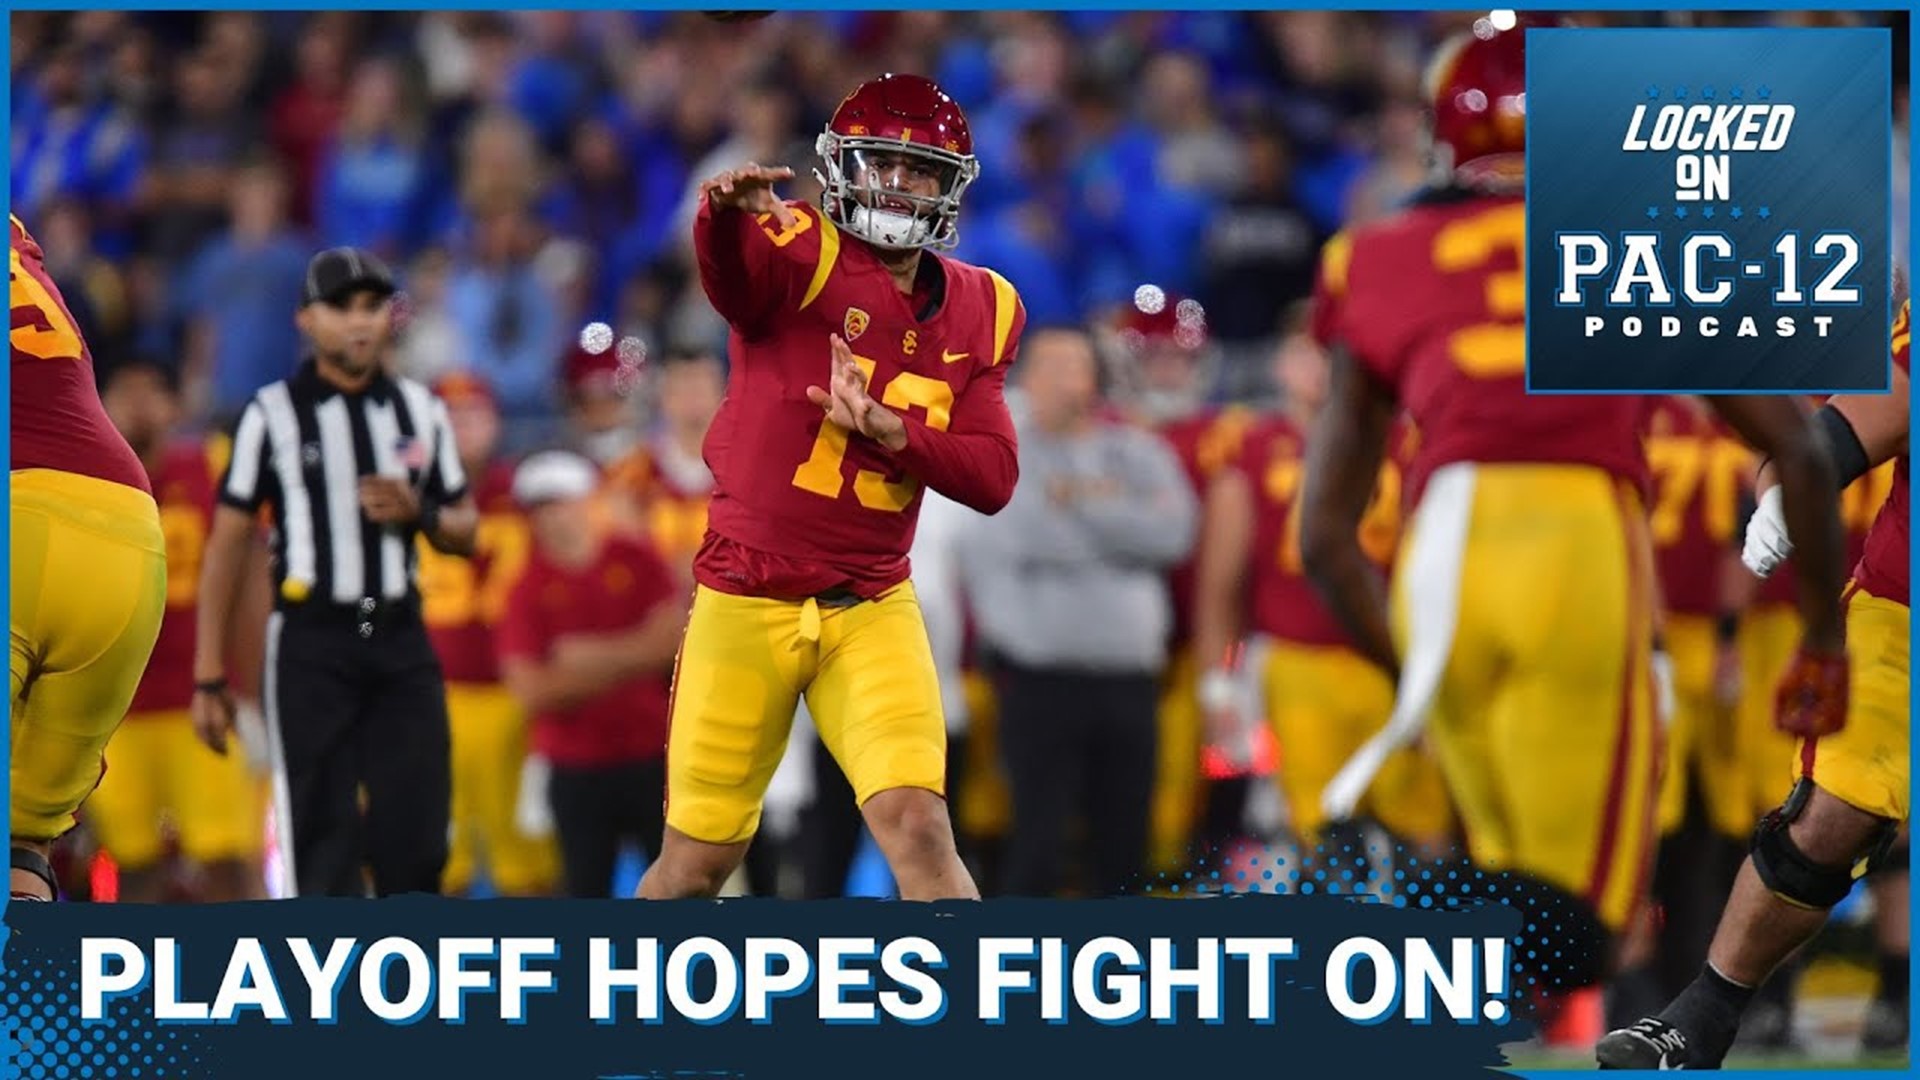 The USC Trojans have secured a slot in the Pac-12 Championship game, and are just two wins away from a likely College Football Playoff berth.